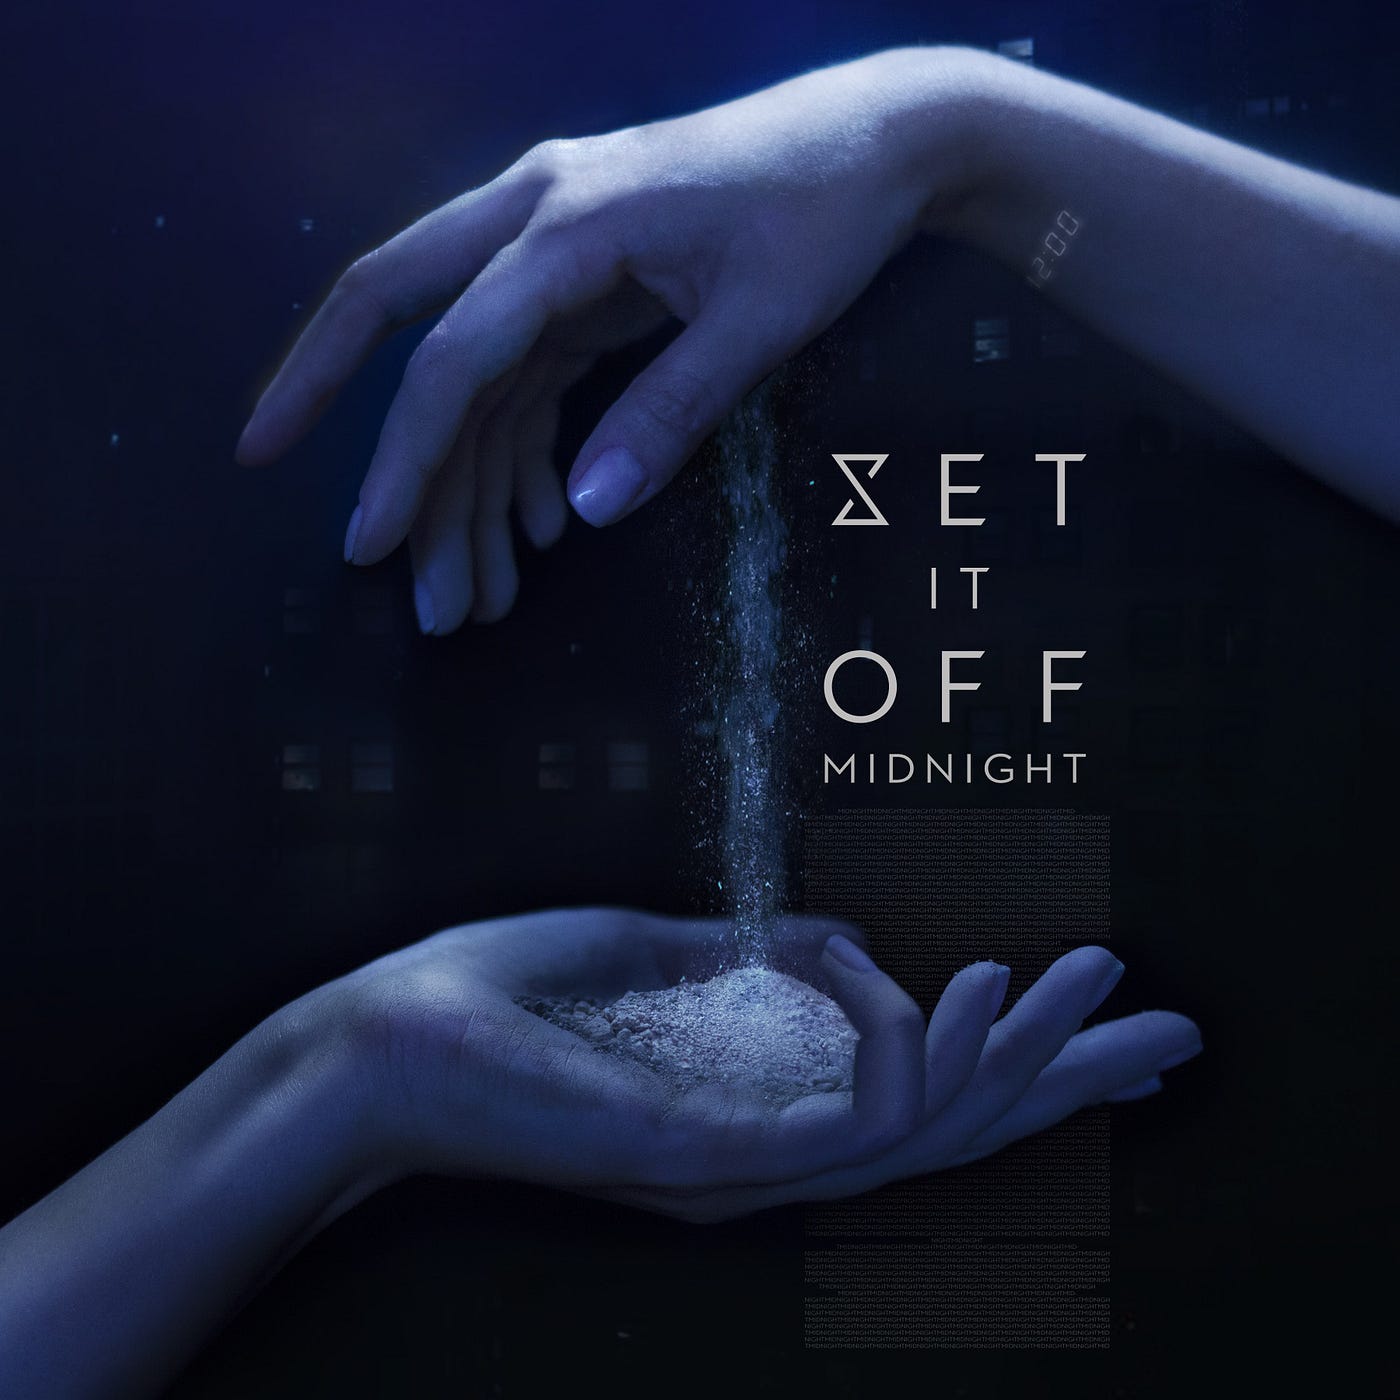 Review: 'Midnight' by Set It Off. After going through what you